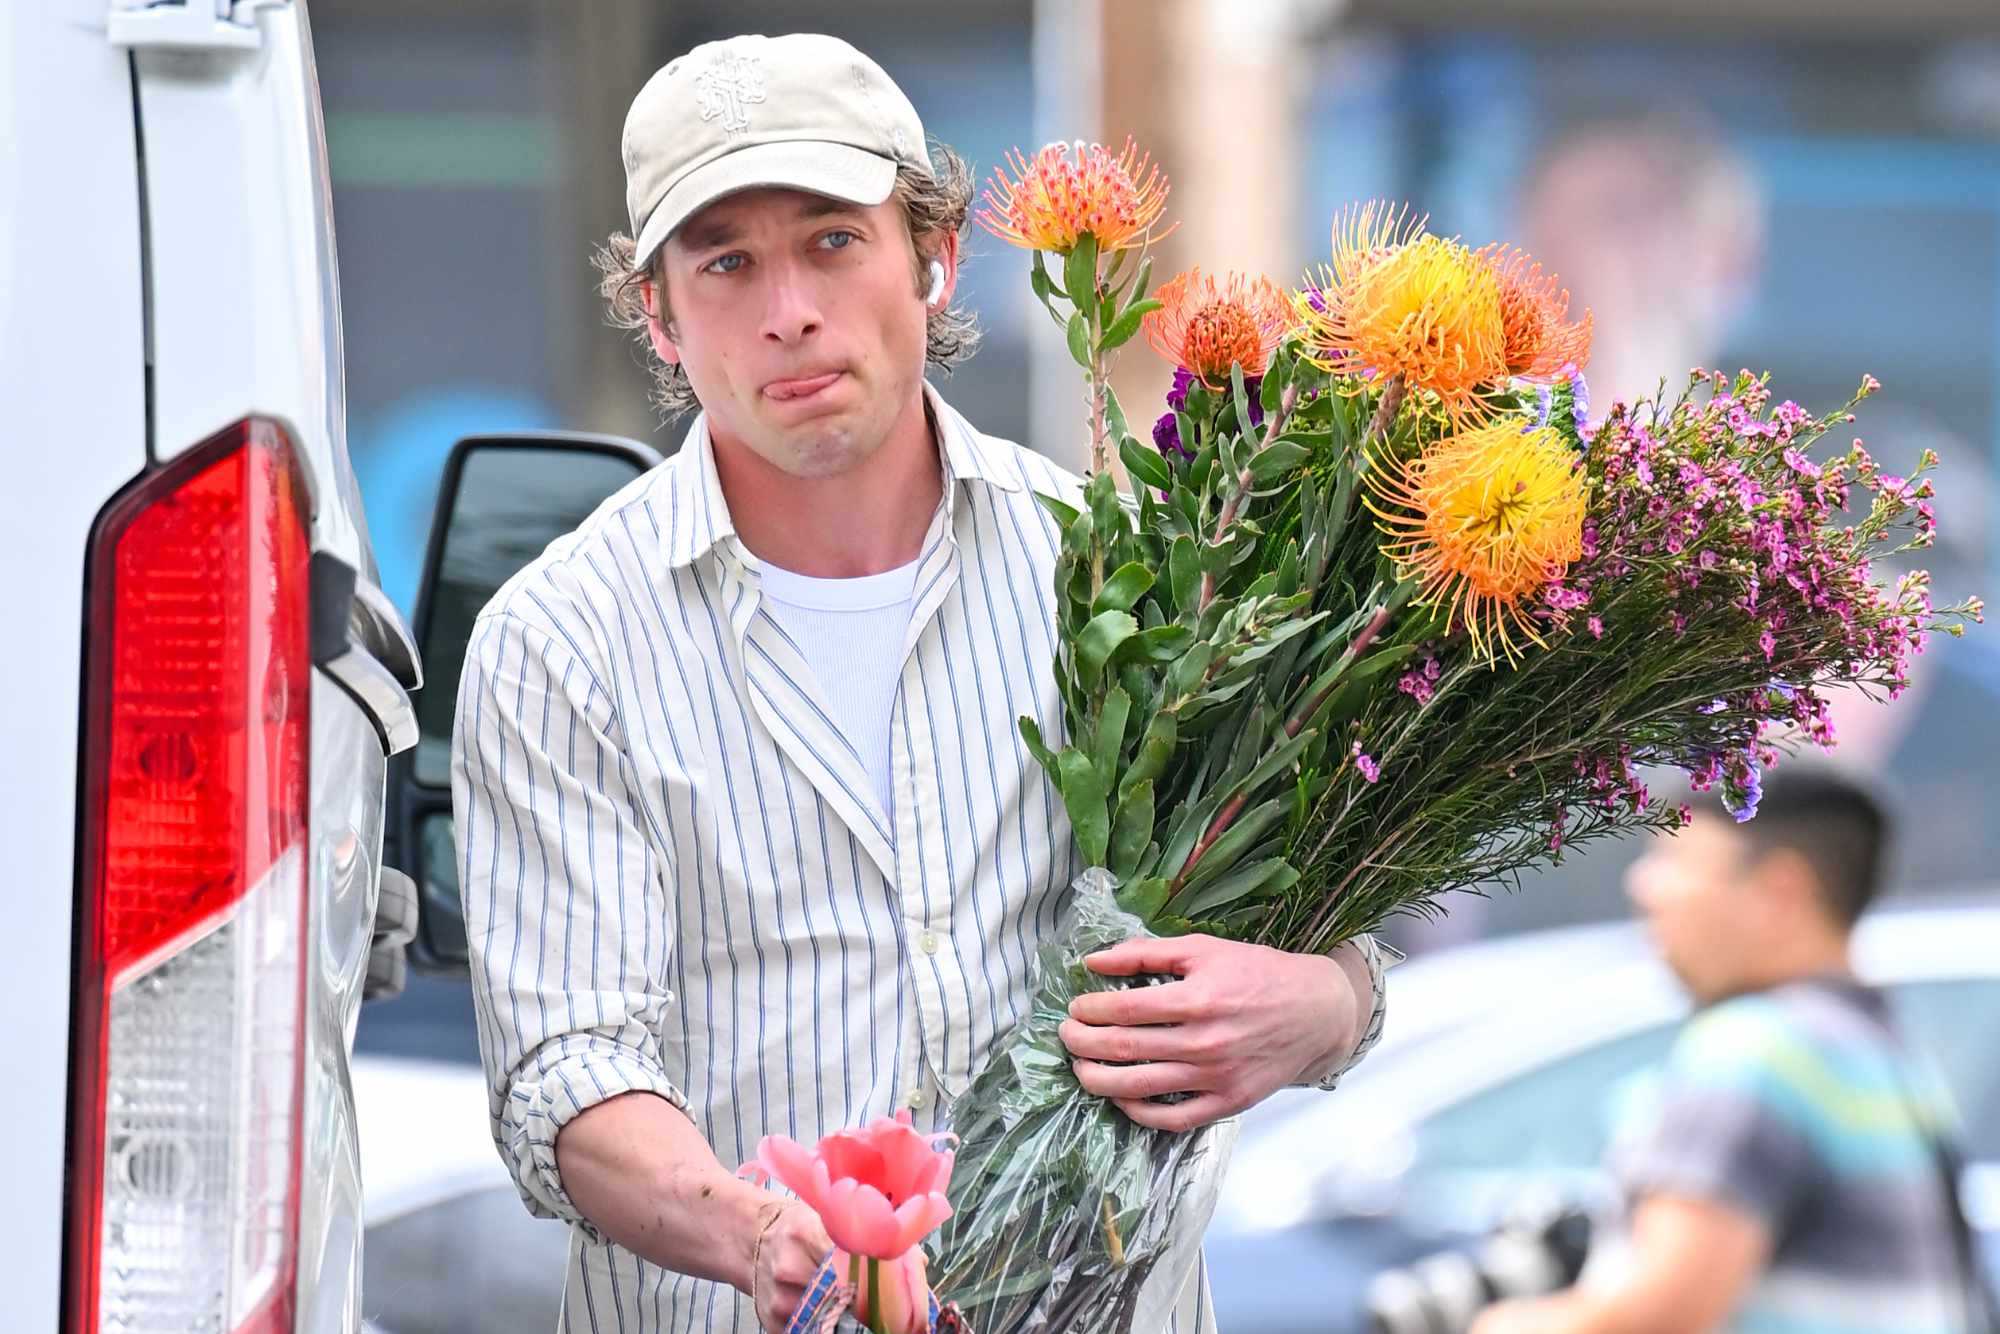 Jeremy Allen White at the farmer's market carrying a tote bag full of flowers